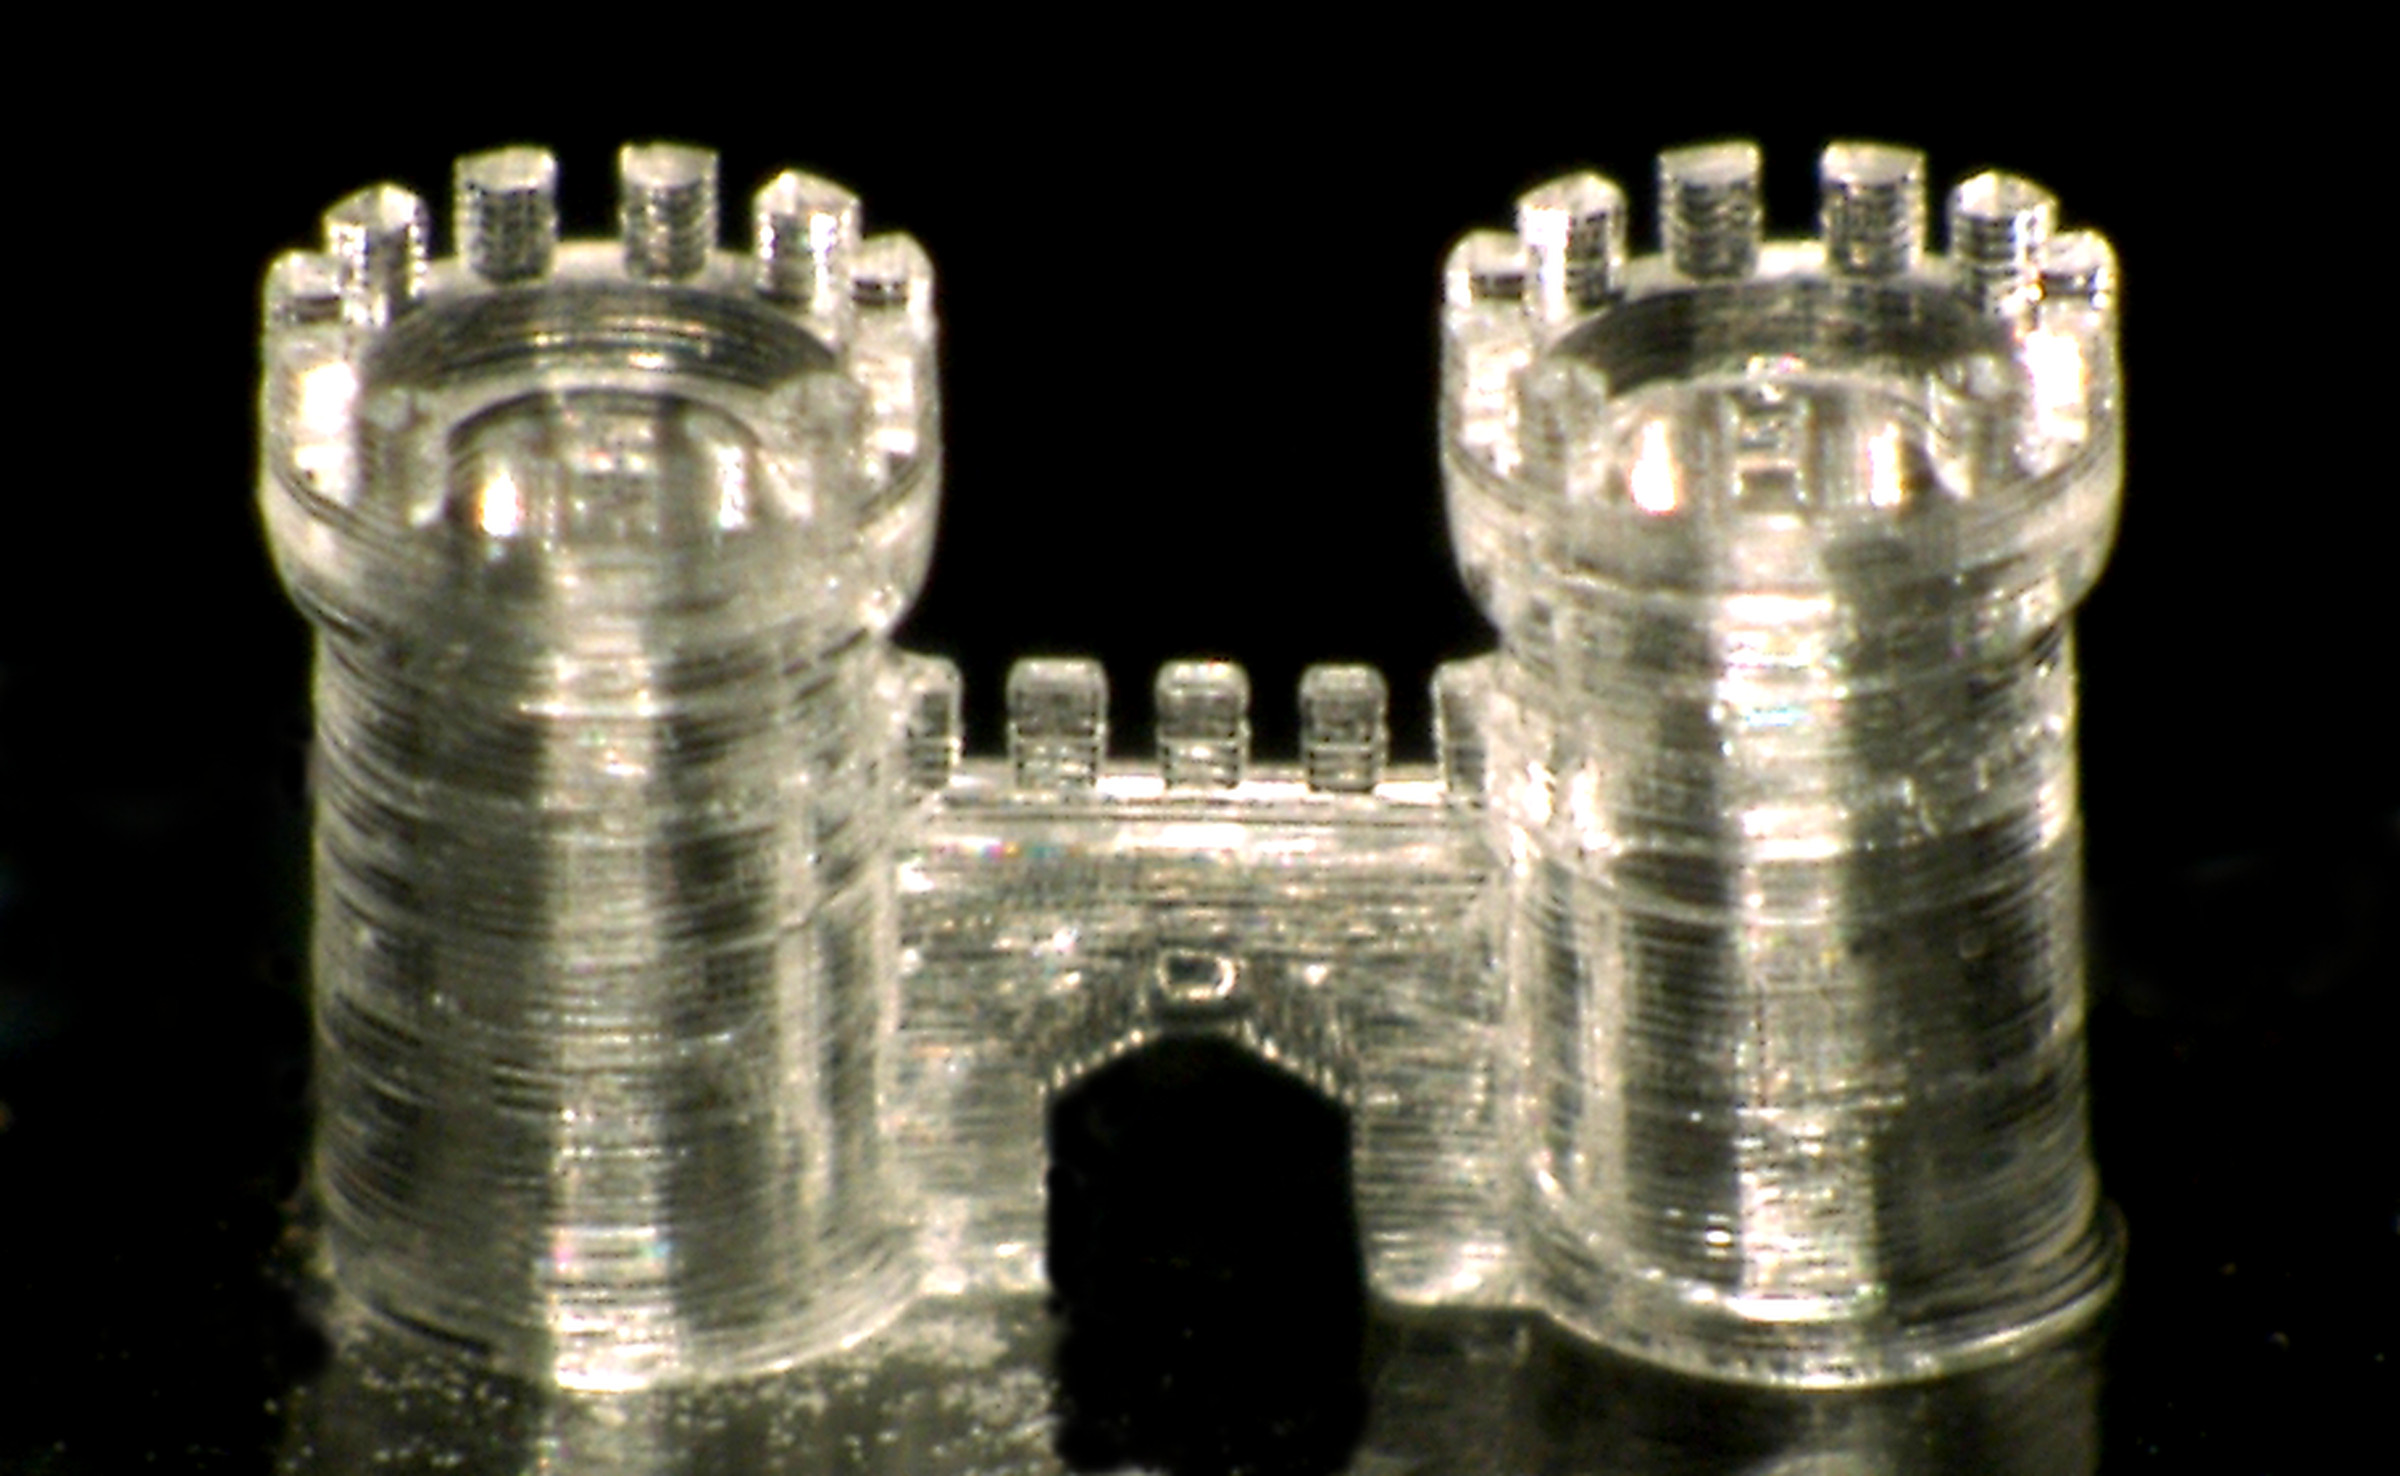 A 3D printed castle gate made by the German researchers